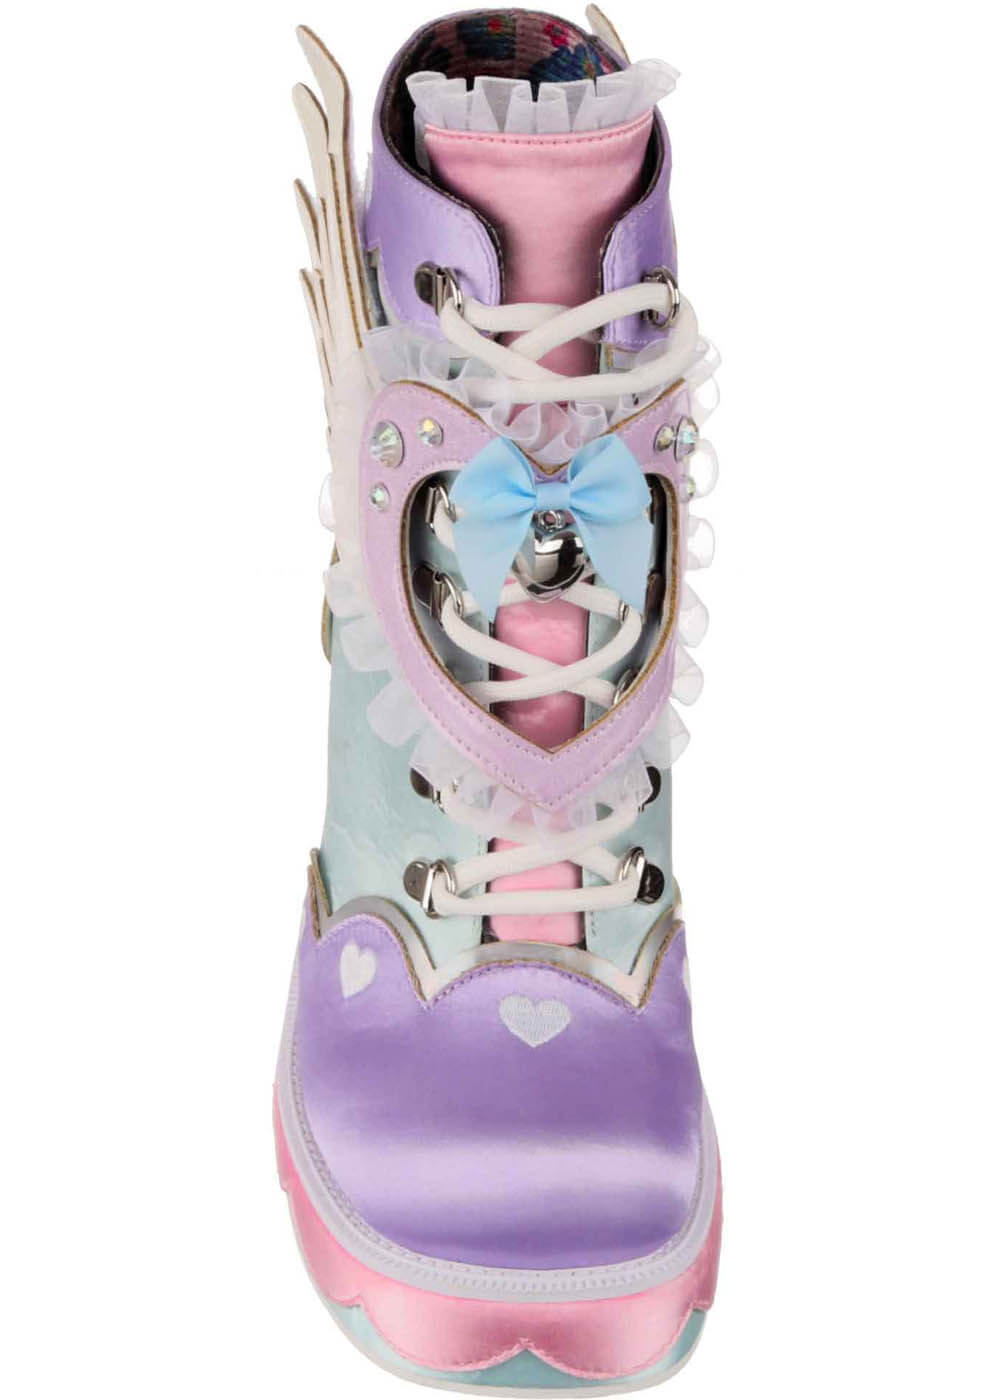 Heart Way There Boots Black By Irregular Choice